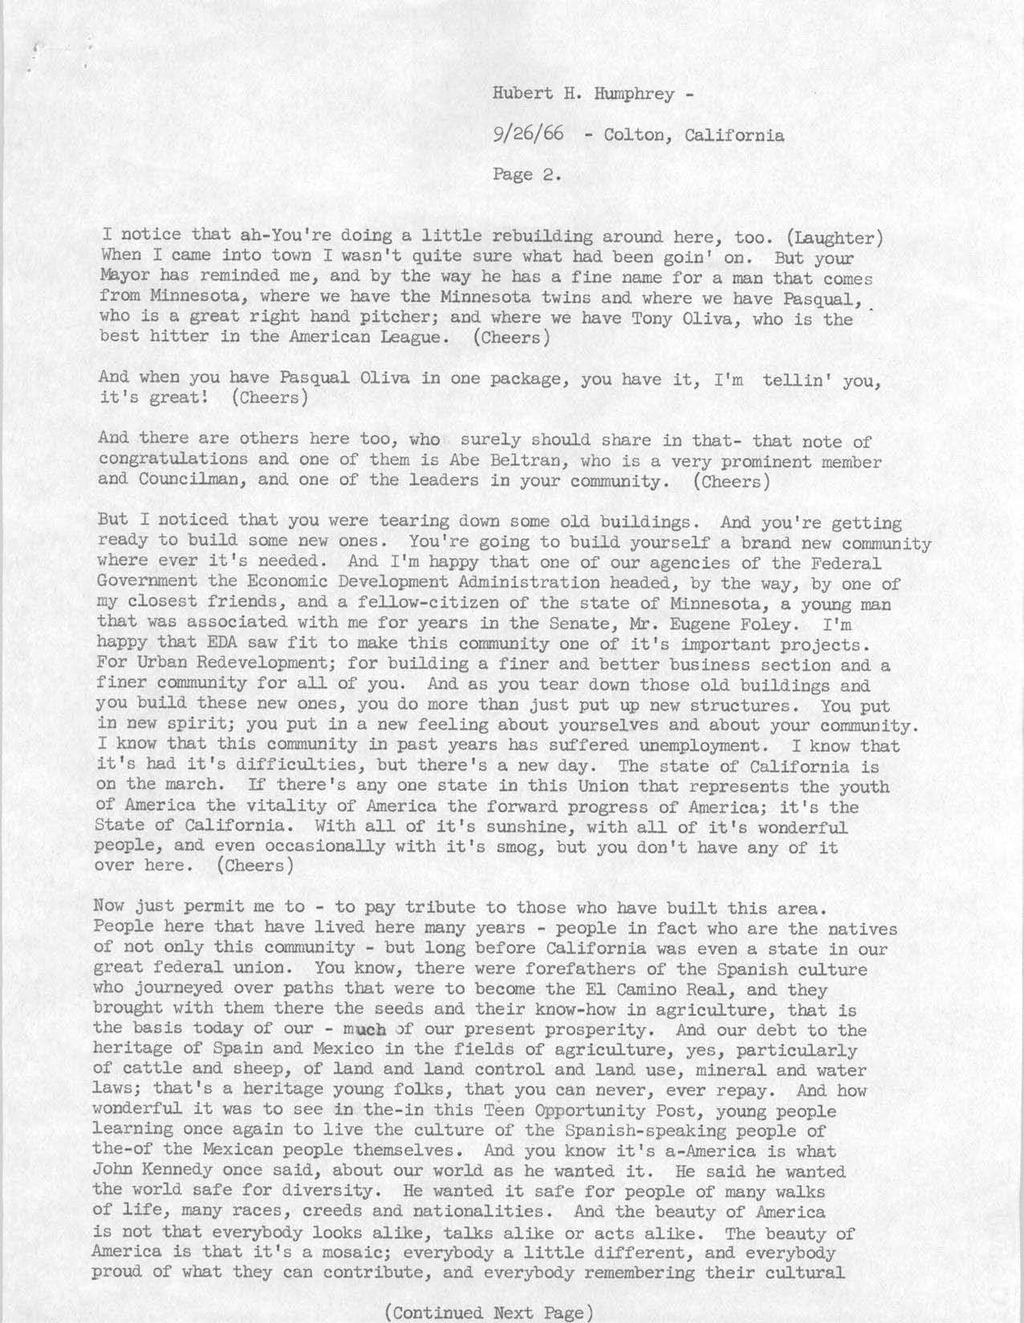 (Continued Next Page) ' Hubert H. Humphrey - 9/26/66 - Colton, California Page 2. I notice that ah-you're doing a little rebuilding around here, too.